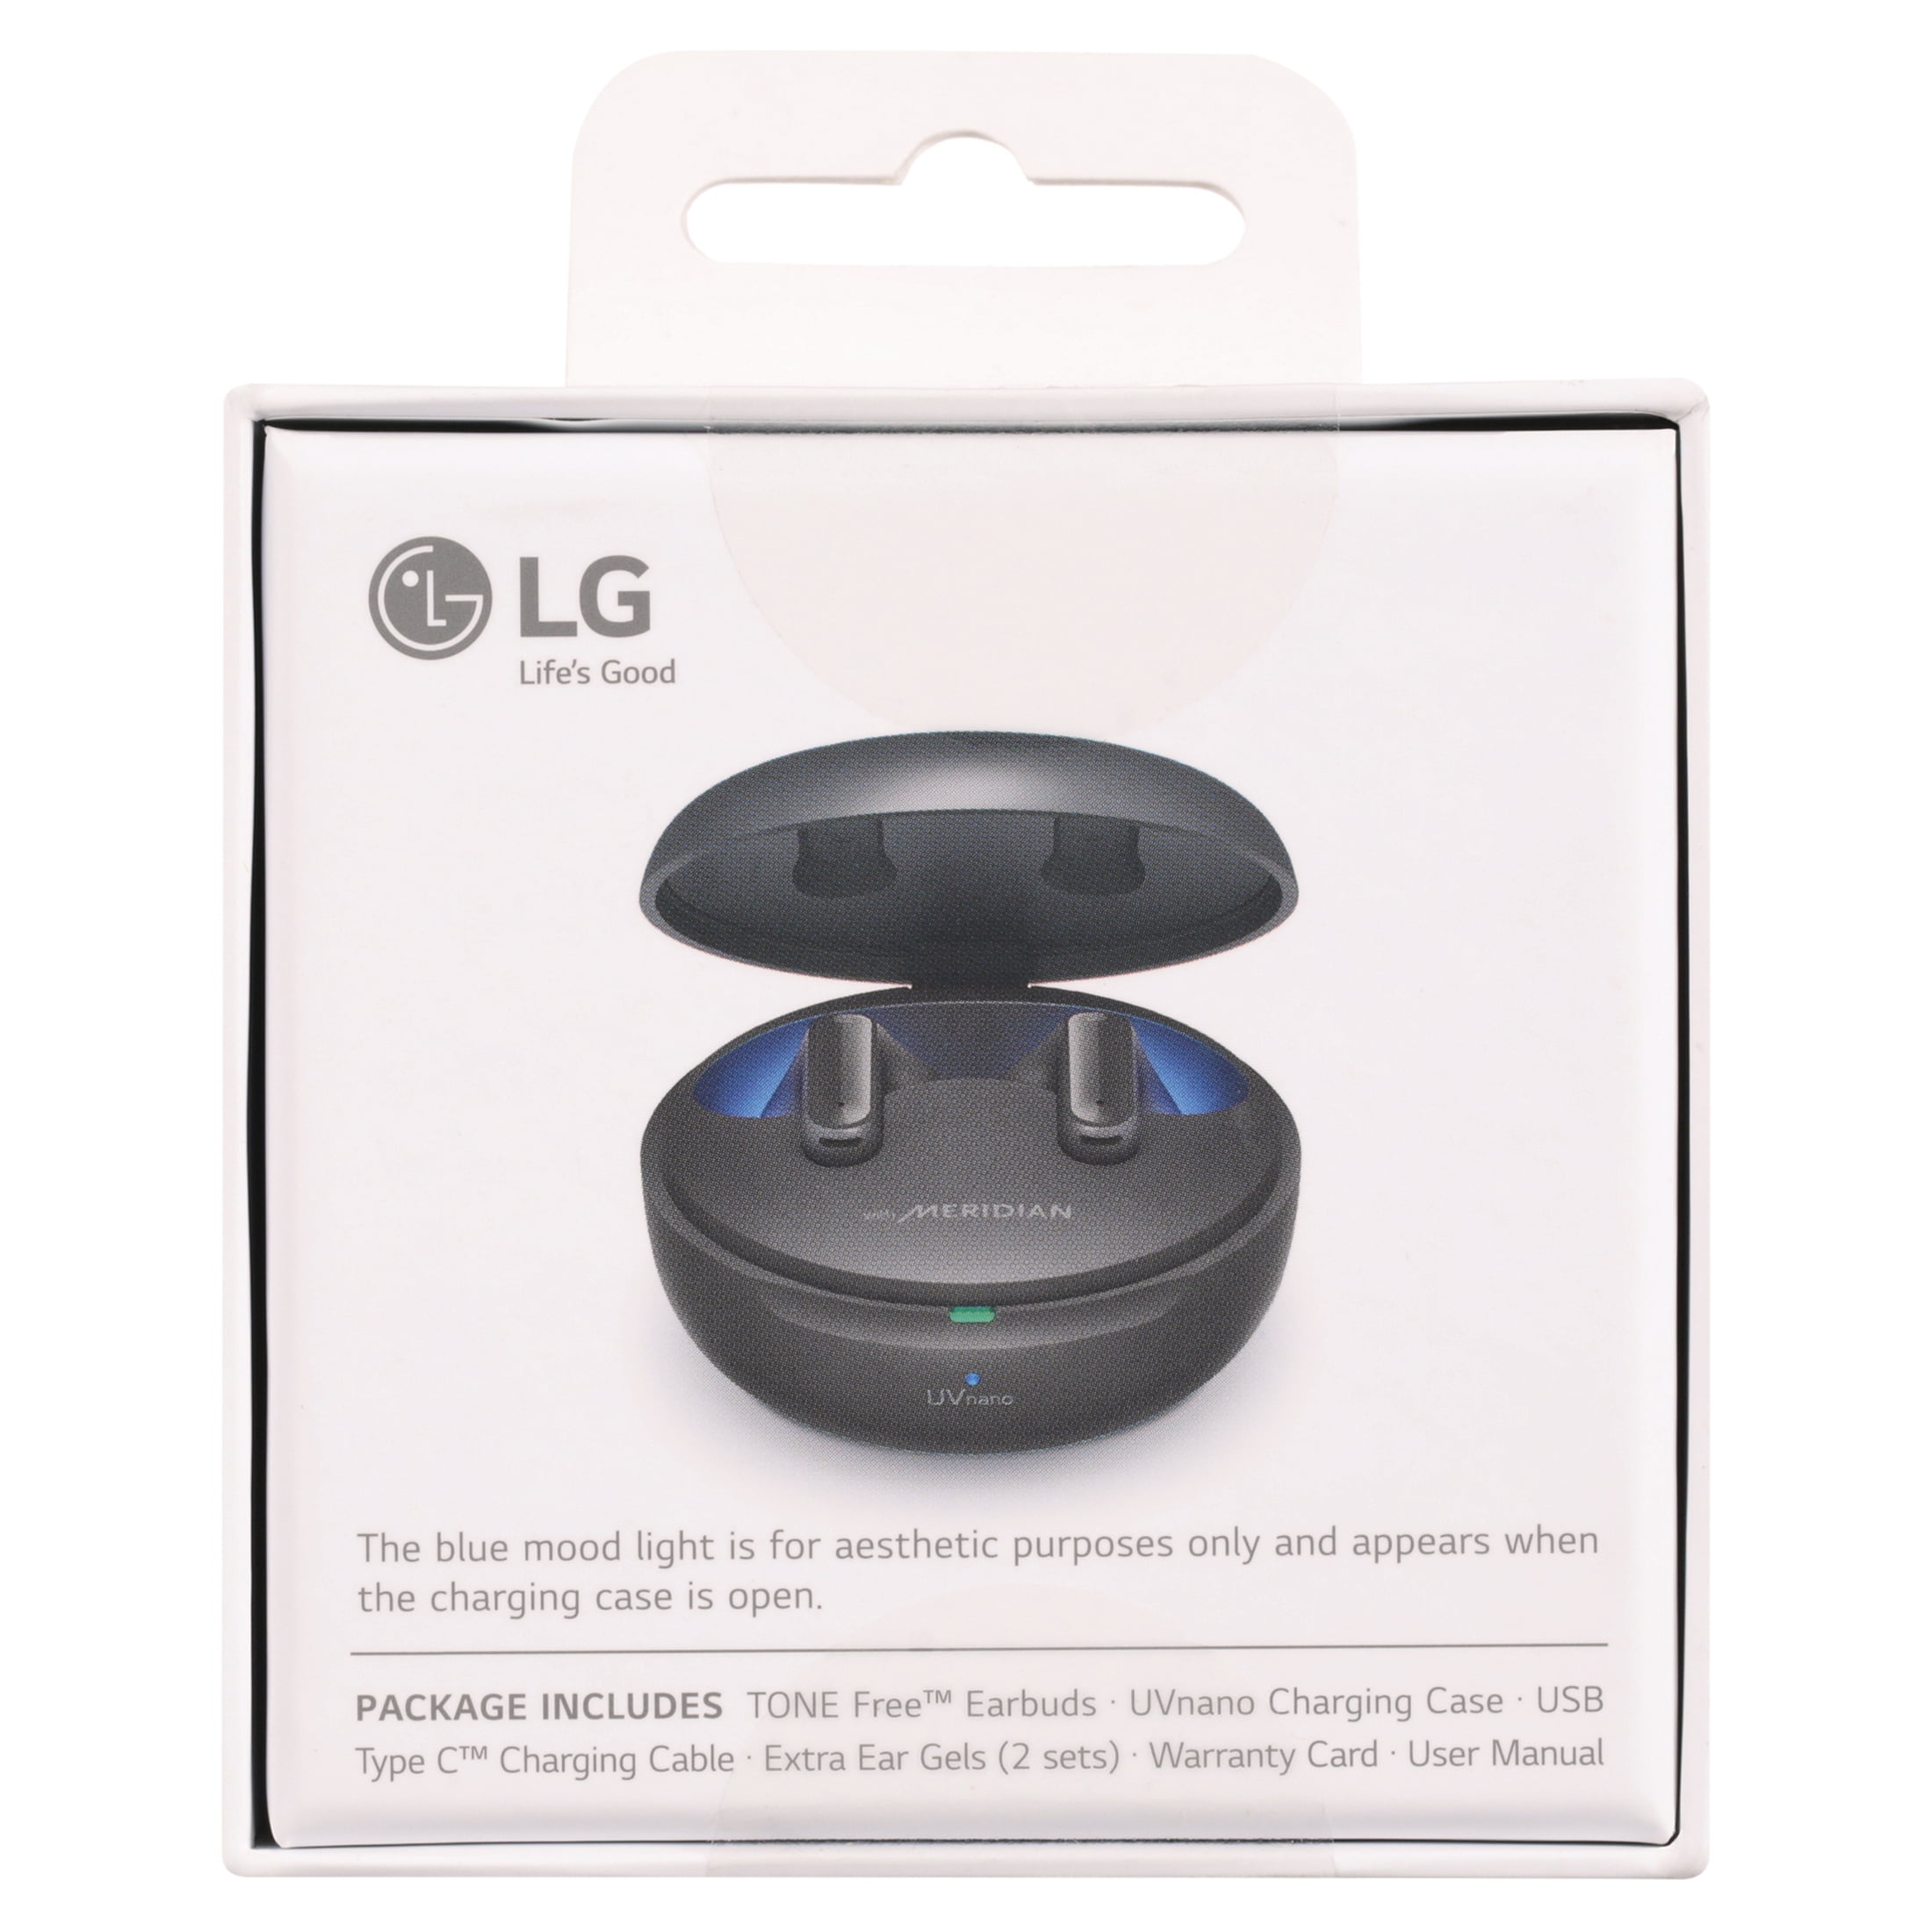 LG Sound, Mesh, of Speaker Mics, Enhanced Bacteria Active Cancelling on 3D Earbuds 99.9% Meridian Wireless with Free True FP8 3 Bluetooth Sound, Black Noise TONE UVnano Immersive Kills